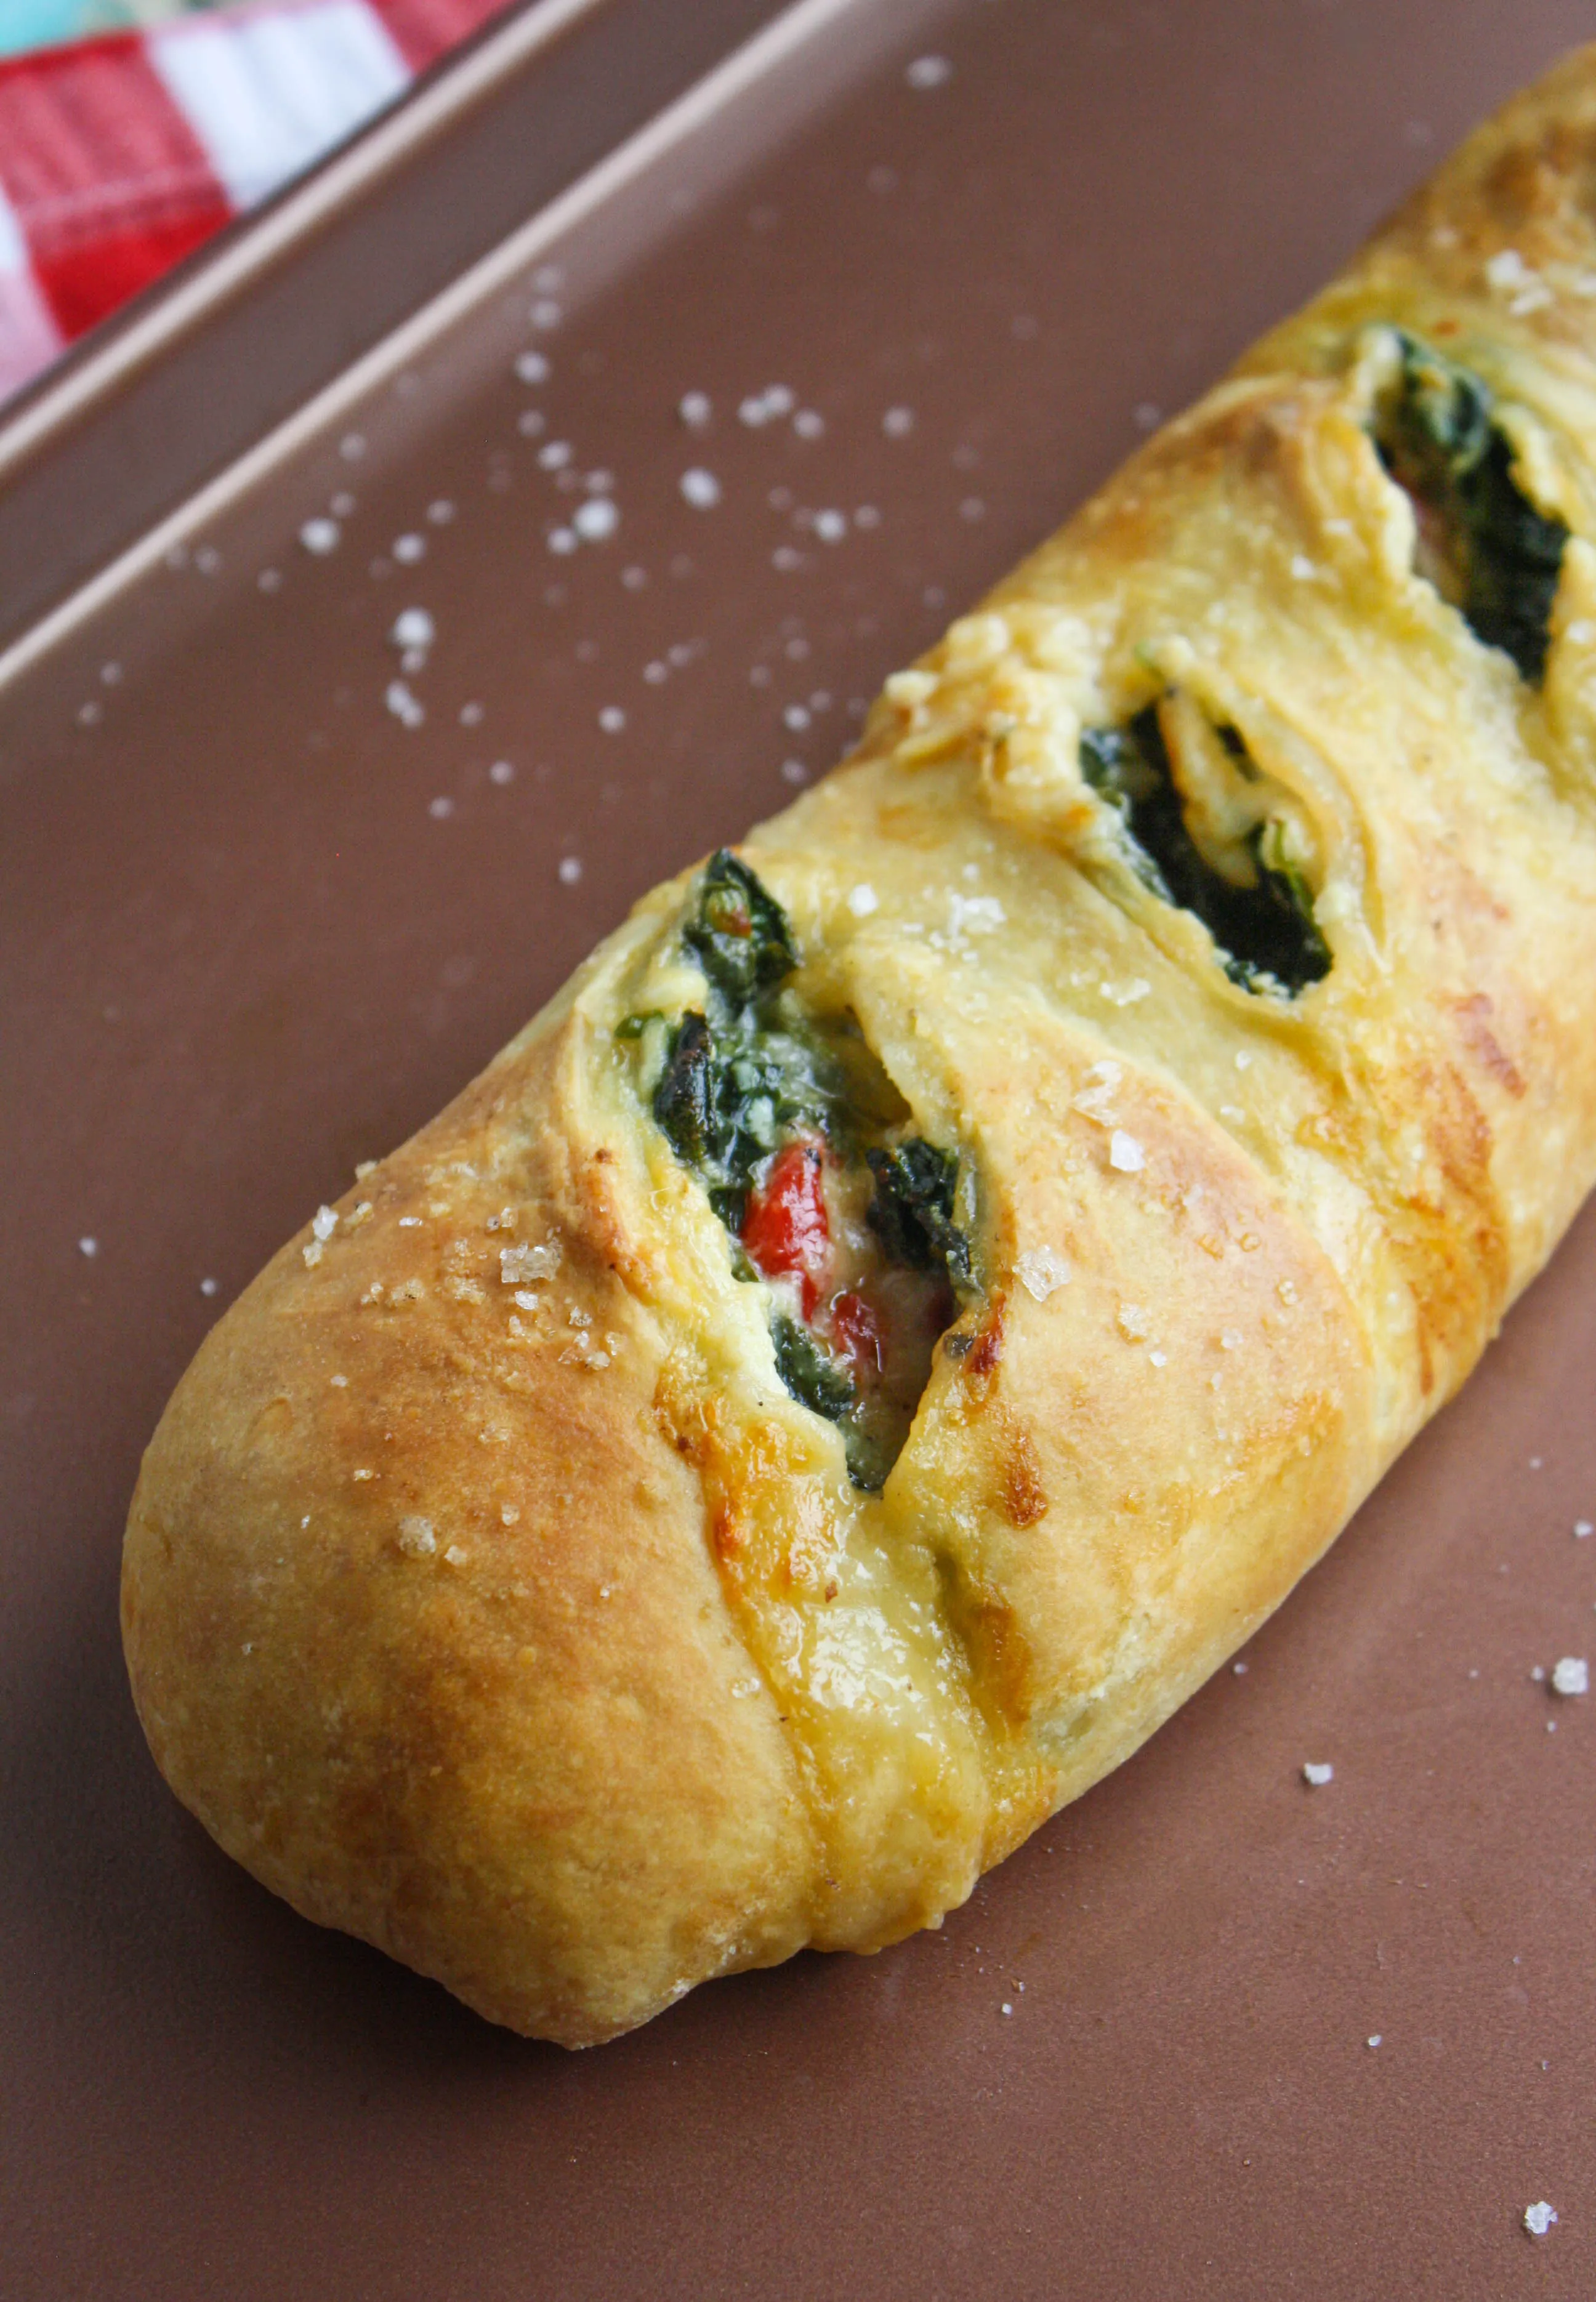 Spinach and Roasted Red Pepper Stromboli is baked until beautifully golden and severed warm for a delicious dish. Stromboli is a dish you'll love any night of the week!